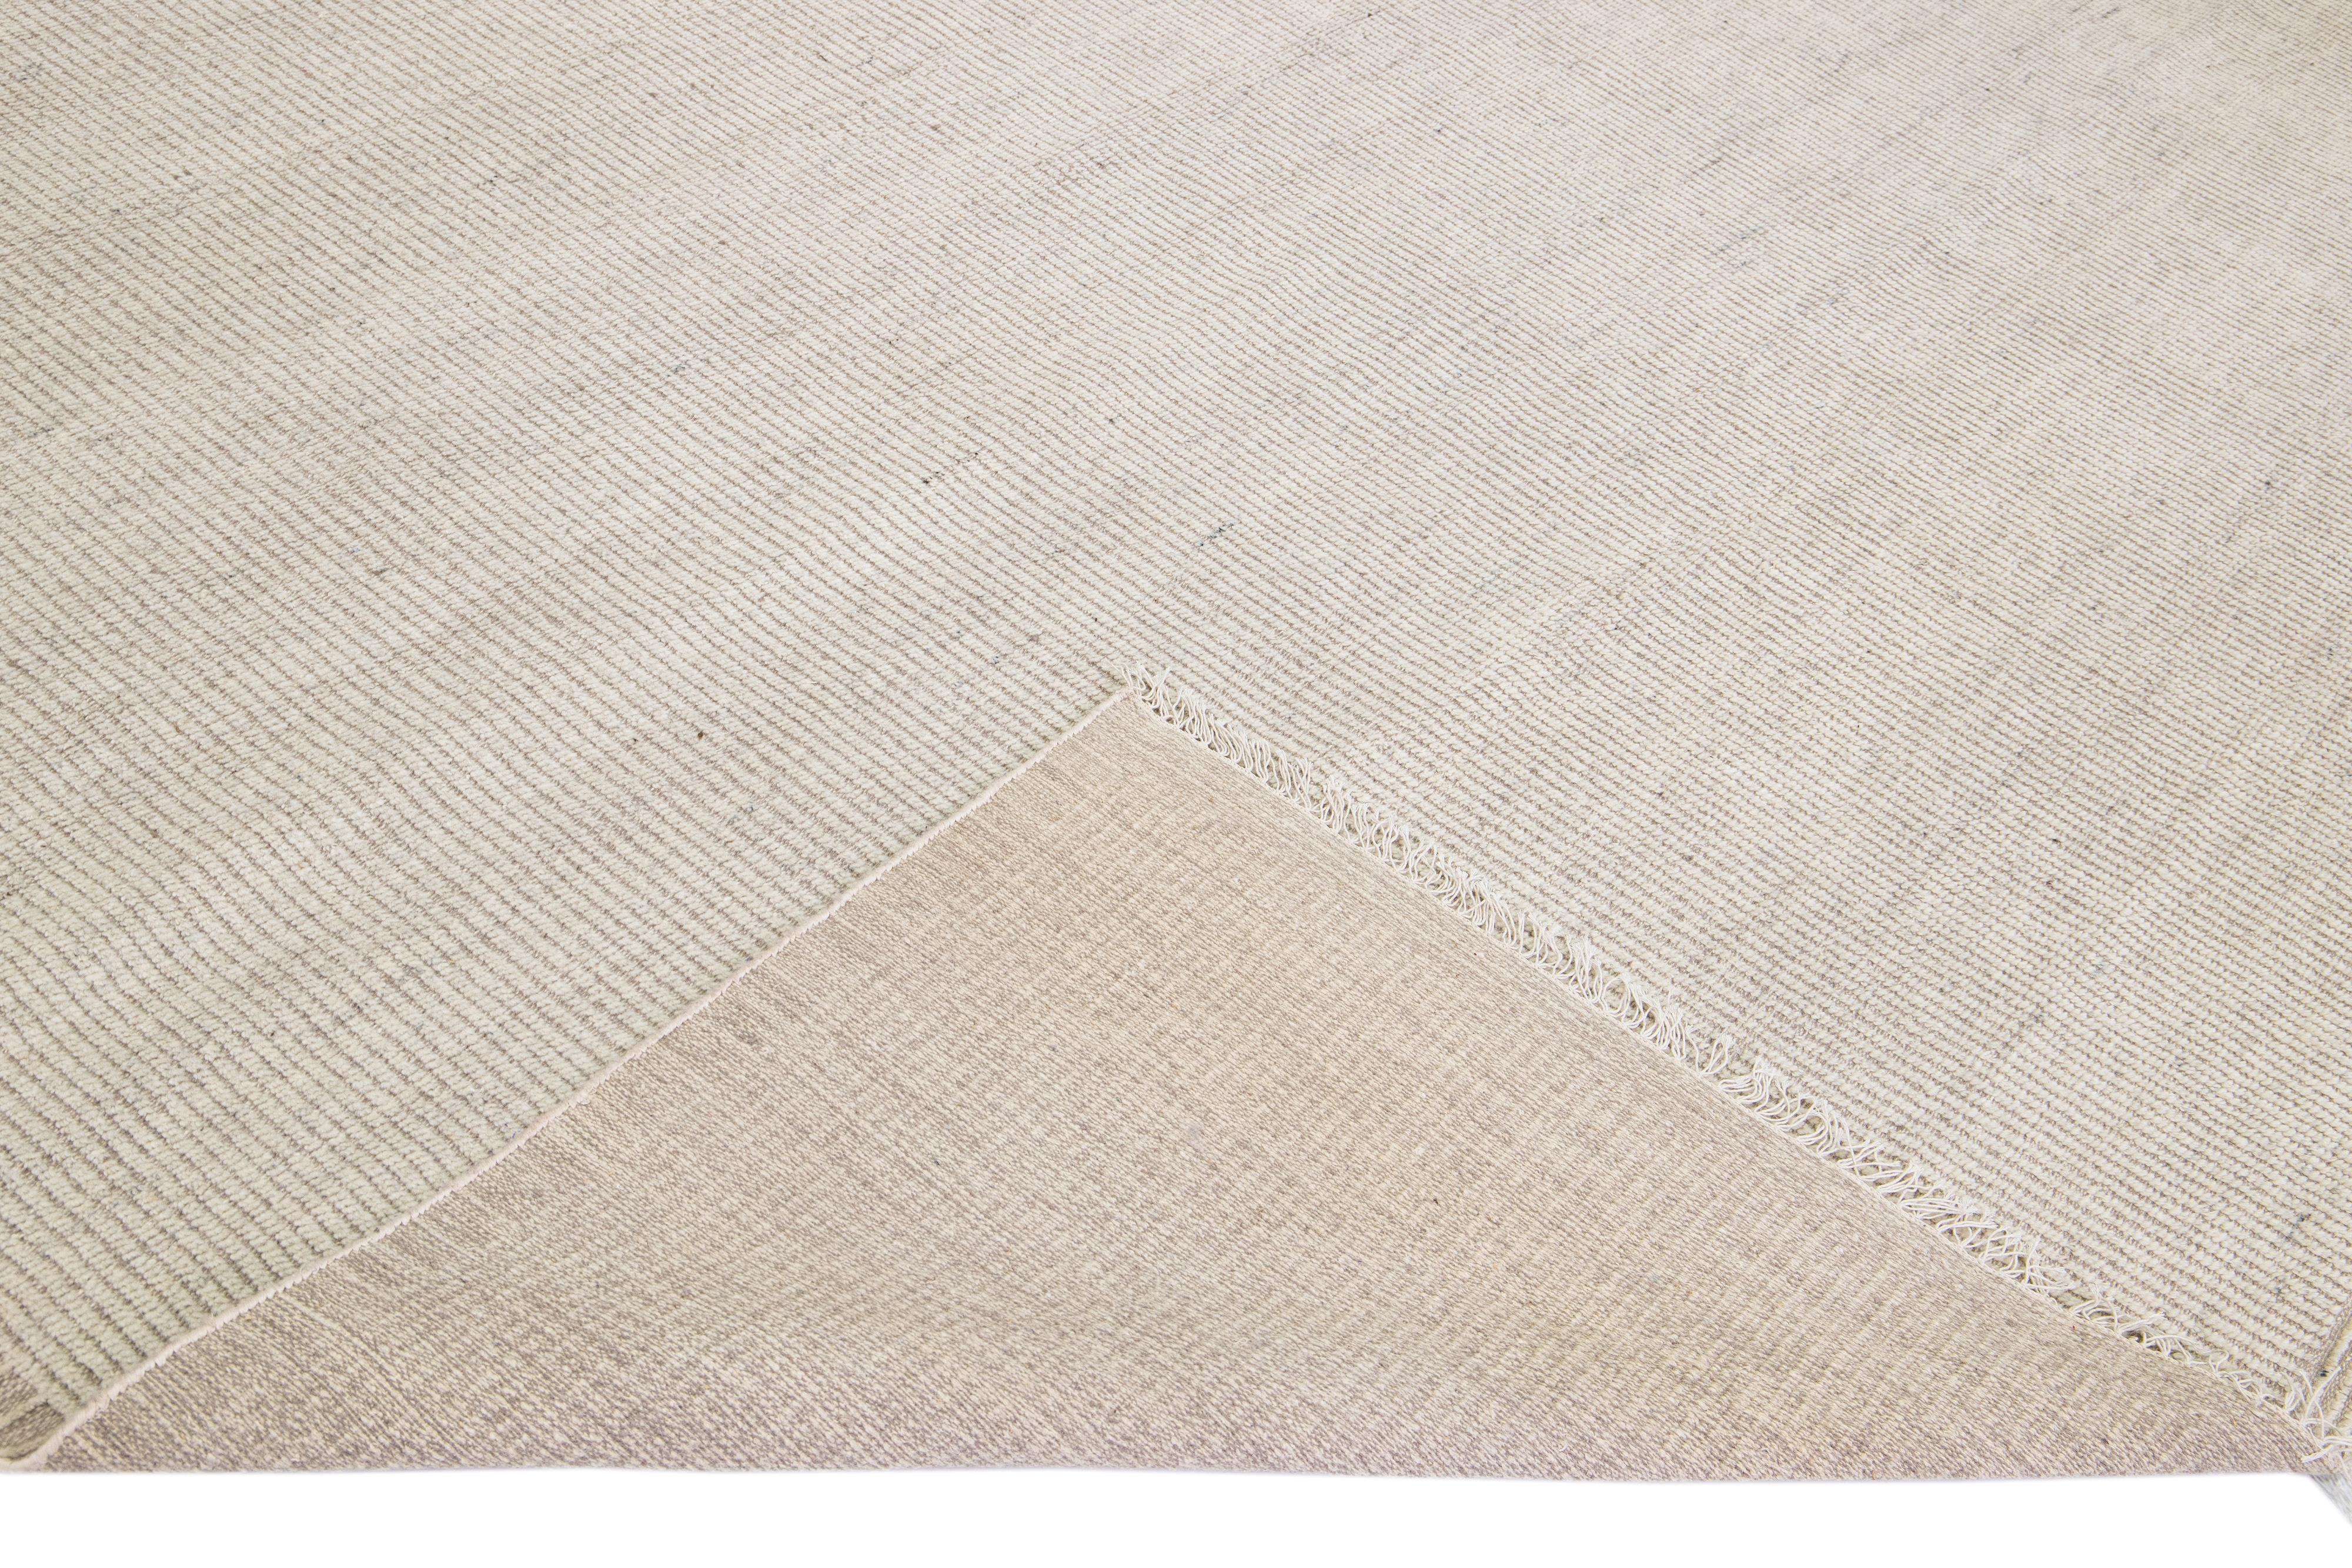 Beautiful modern Moroccan style hand-knotted wool rug with an ivory field and fringes on the top and bottom end of a gorgeous vertical striped design.

This rug measures: 12'2